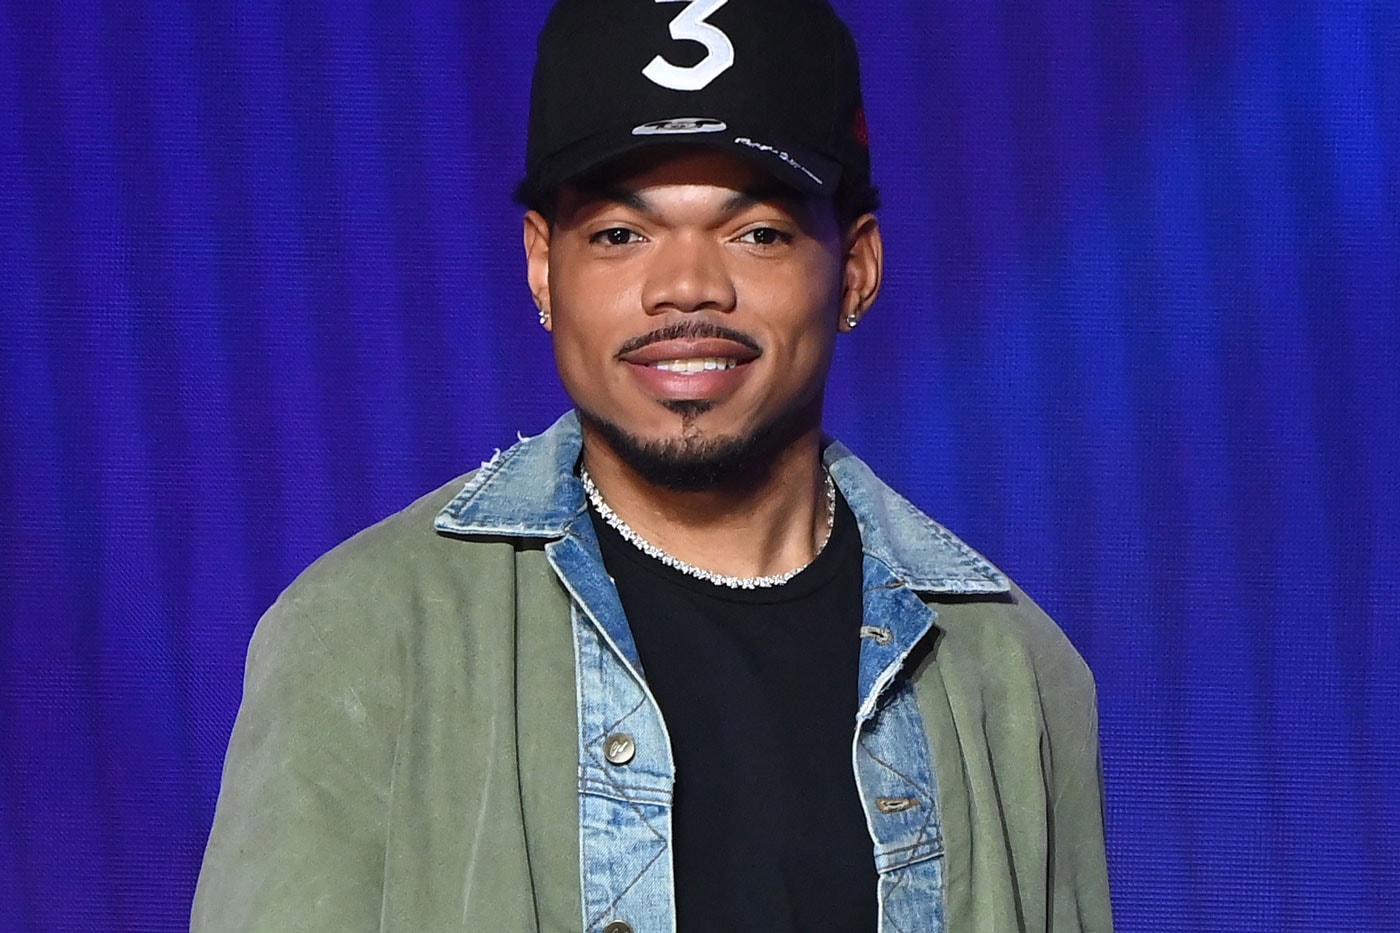 Chance The Rapper Meets "Saran the Wrapper" on “Wait Wait…Don’t Tell Me!”